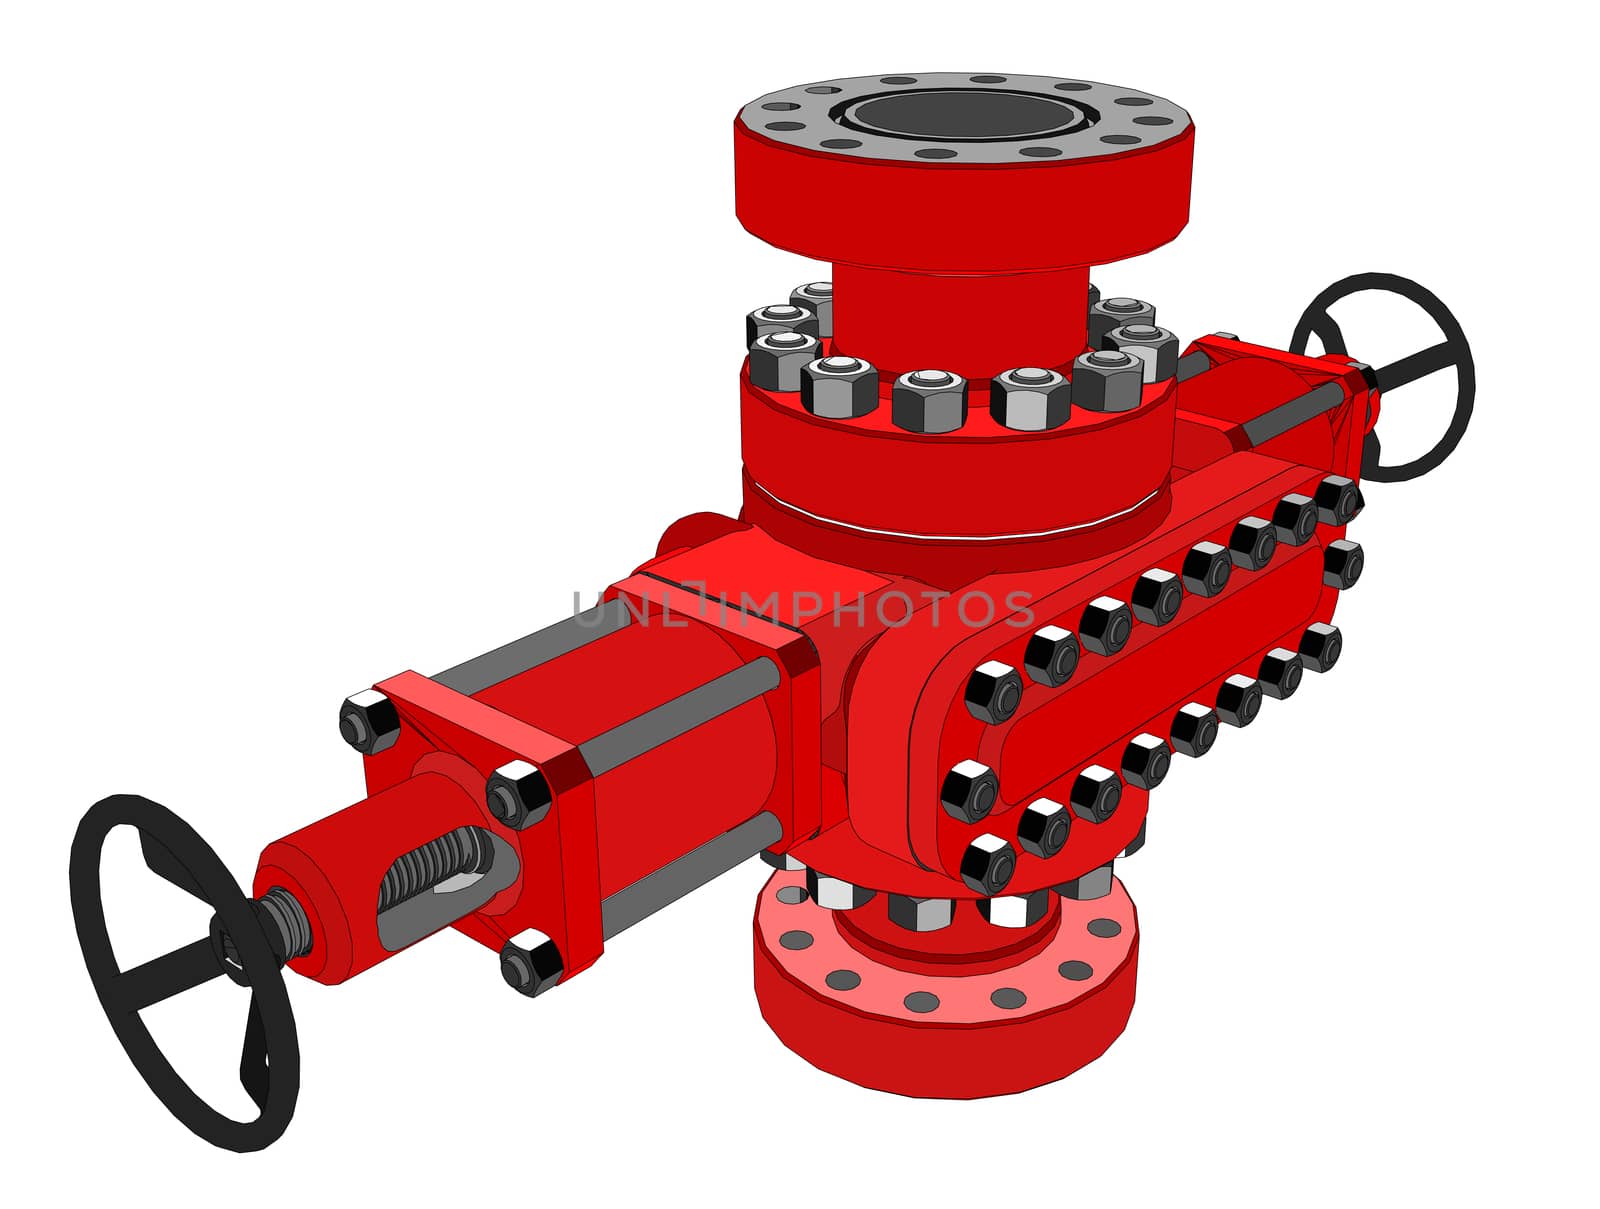 Blowout preventer. 3d illustration. Concept of the oil industry